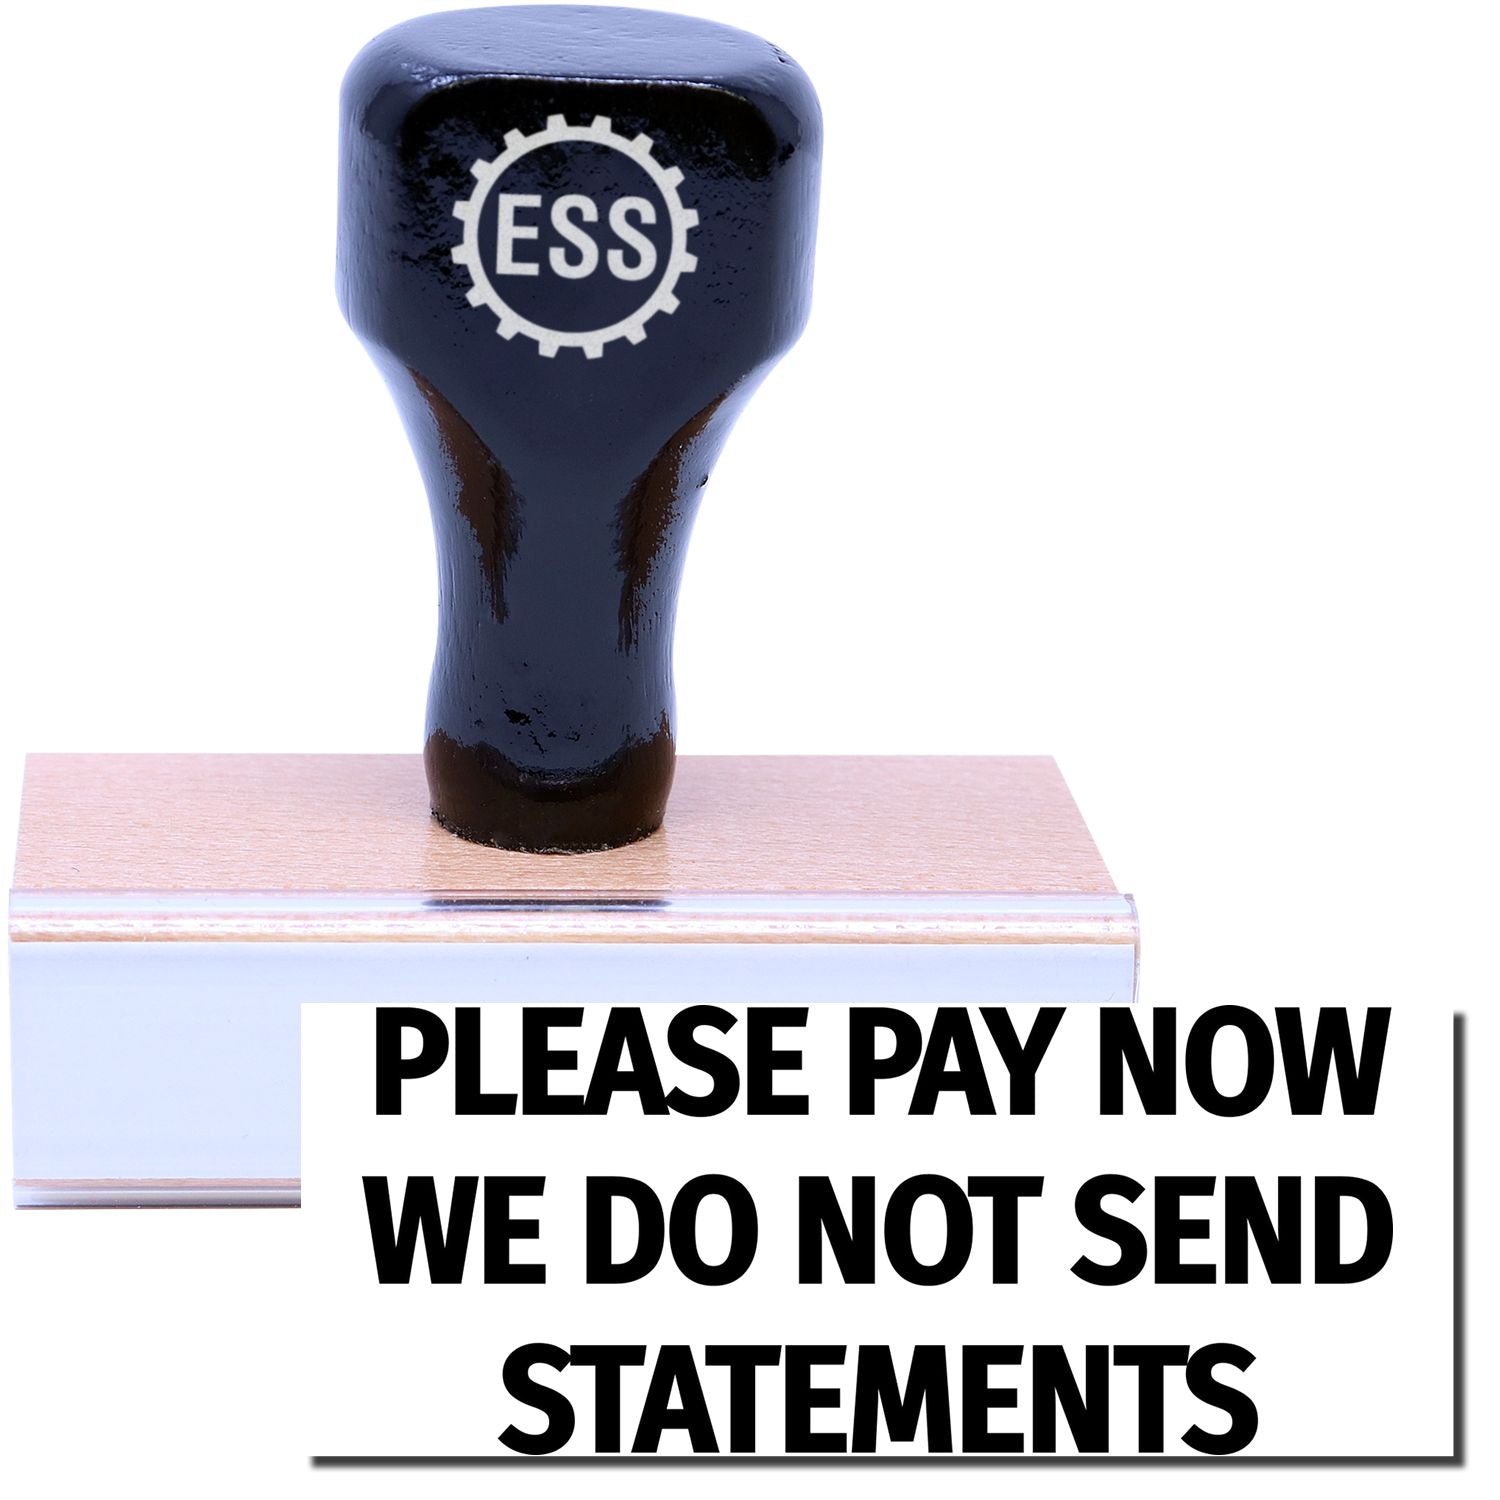 A stock office rubber stamp with a stamped image showing how the texts "PLEASE PAY NOW" and "WE DO NOT SEND STATEMENTS" are displayed after stamping.